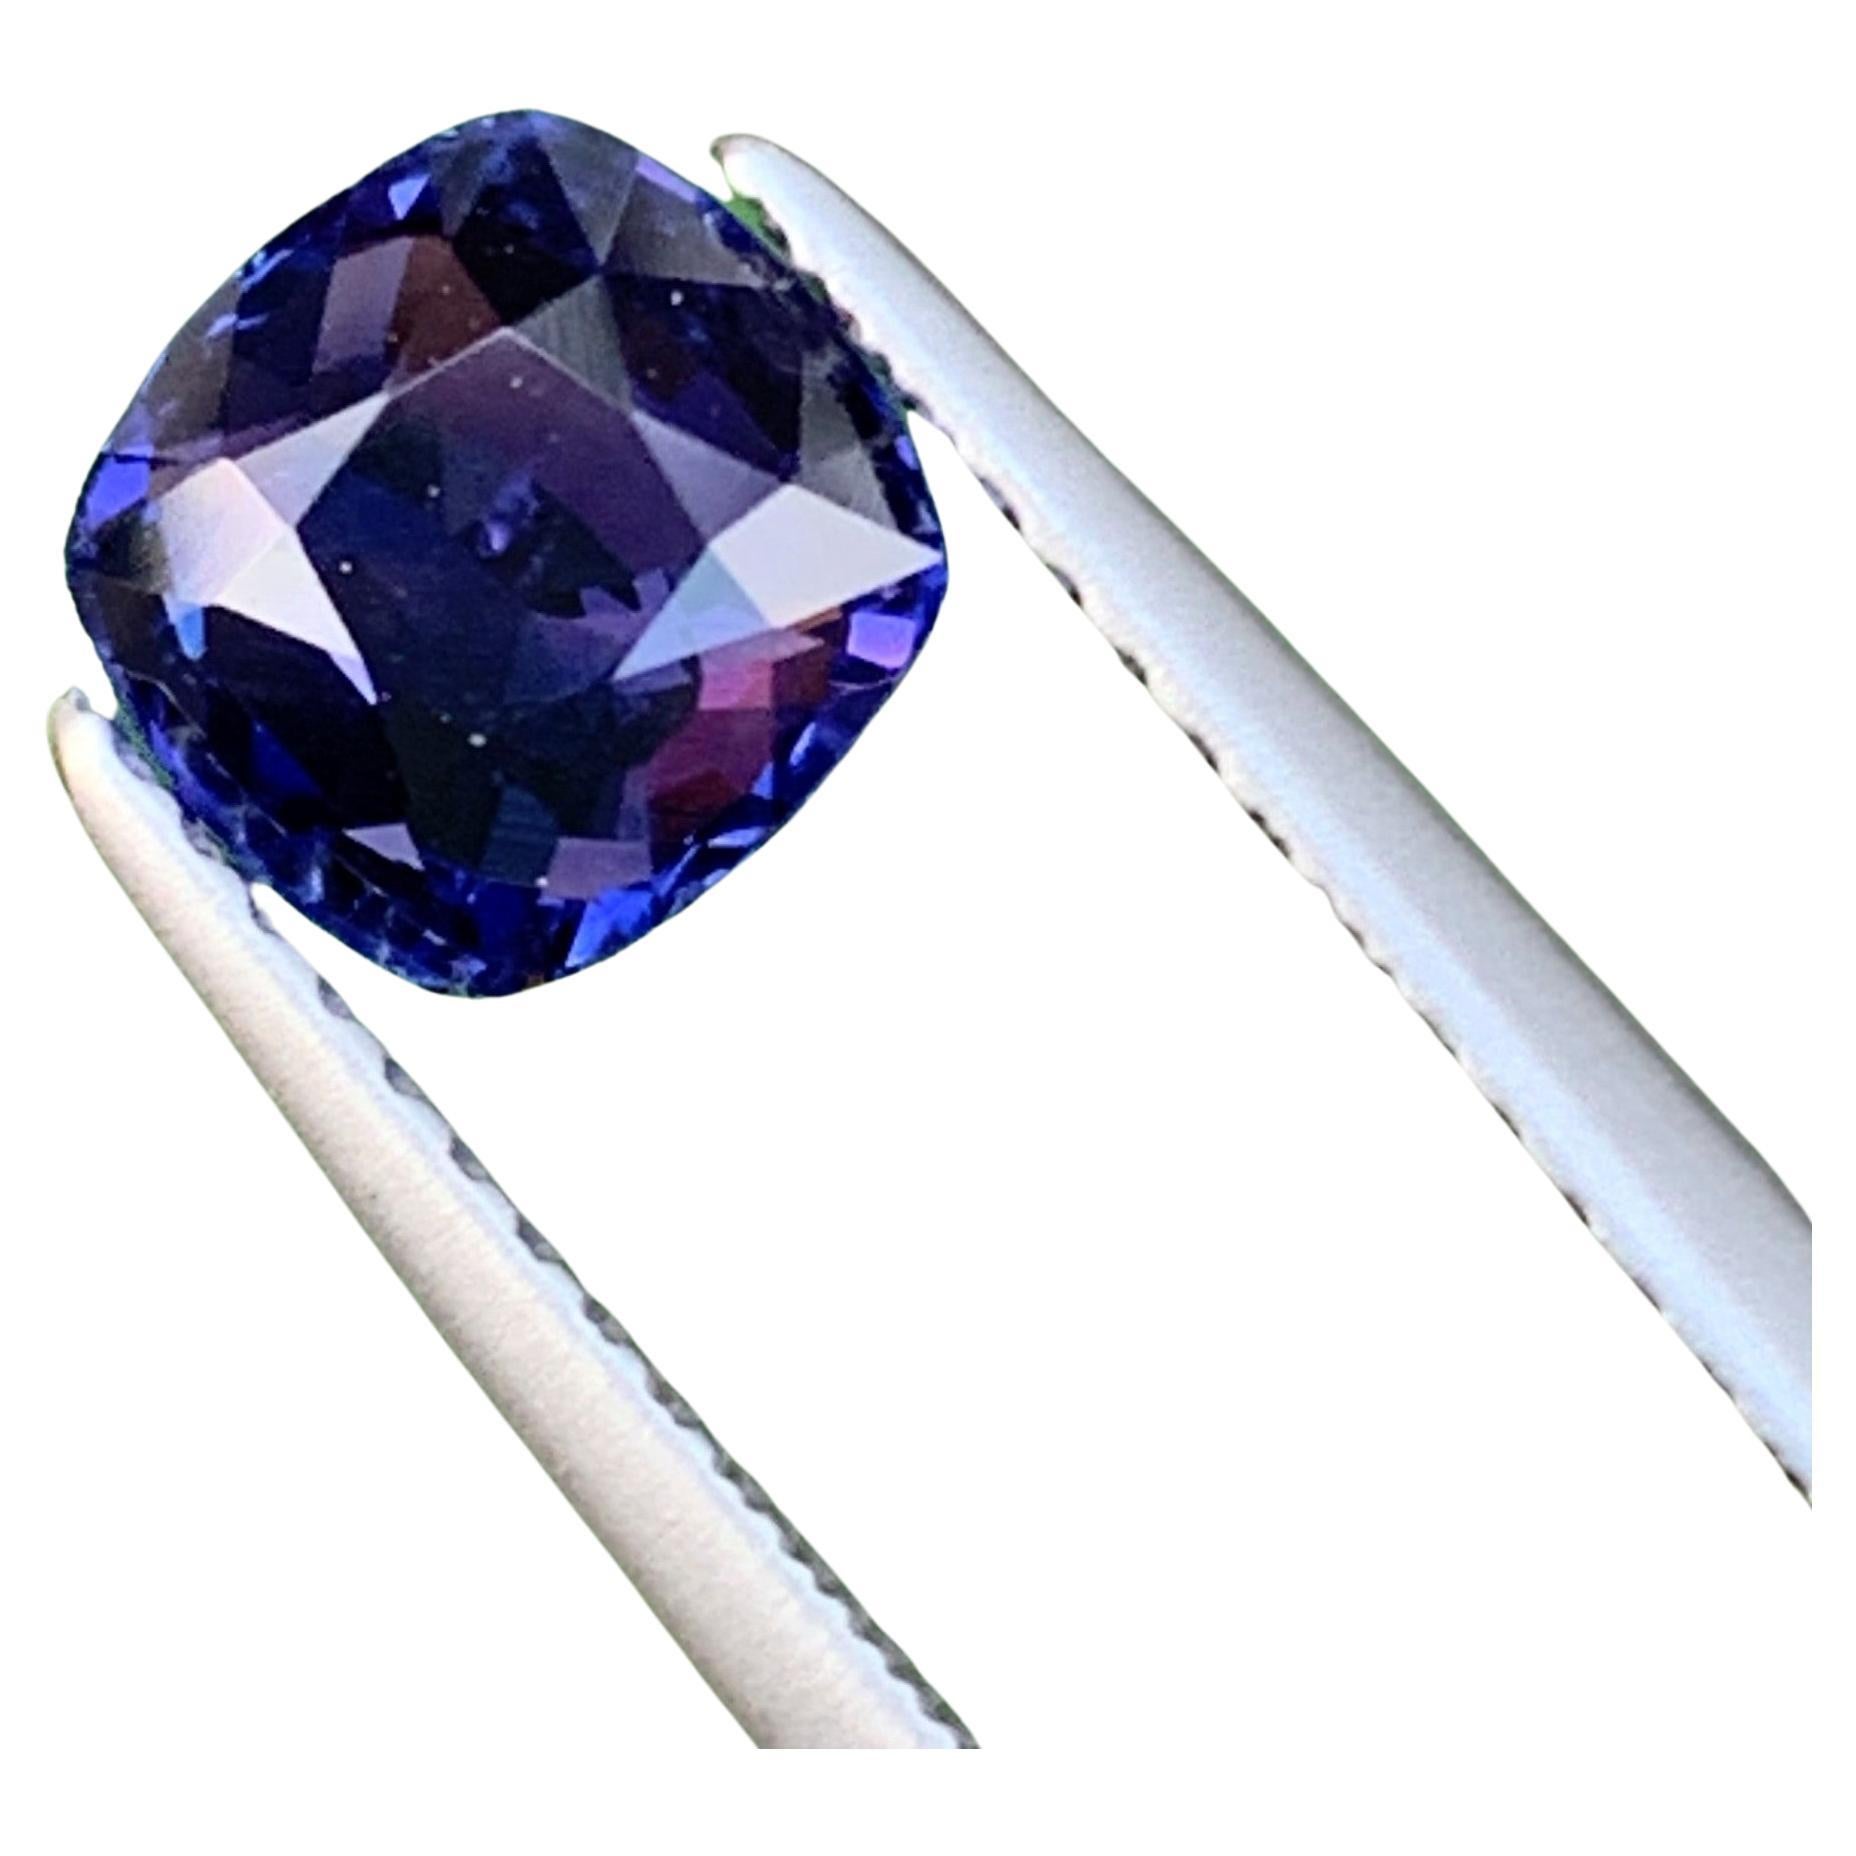 Certified 1.58 Carat Loose Natural Blue Sapphire Gem Cushion Shape for Ring 